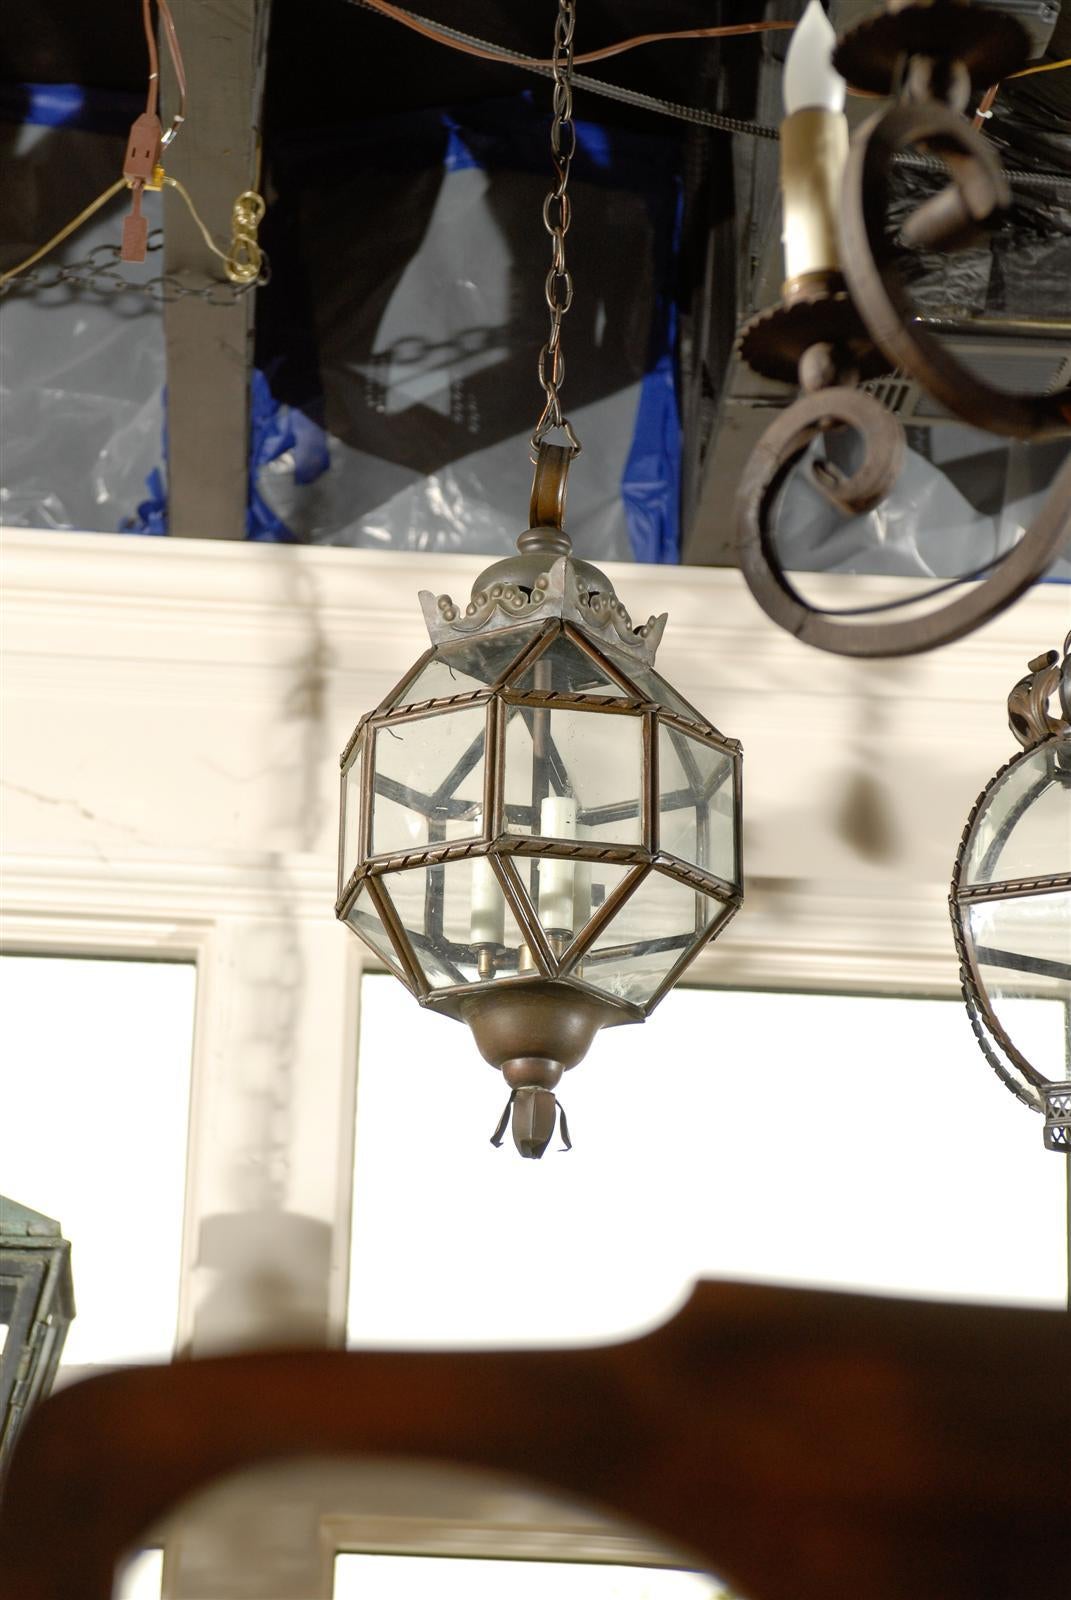 An Italian lantern made of metal and glass with a sphere shape from the mid 20th century.  This Italian glass and metal lantern features a polygonal sphere with a metal structure with a ribbon decor surrounding glass squares, with new wiring and wax